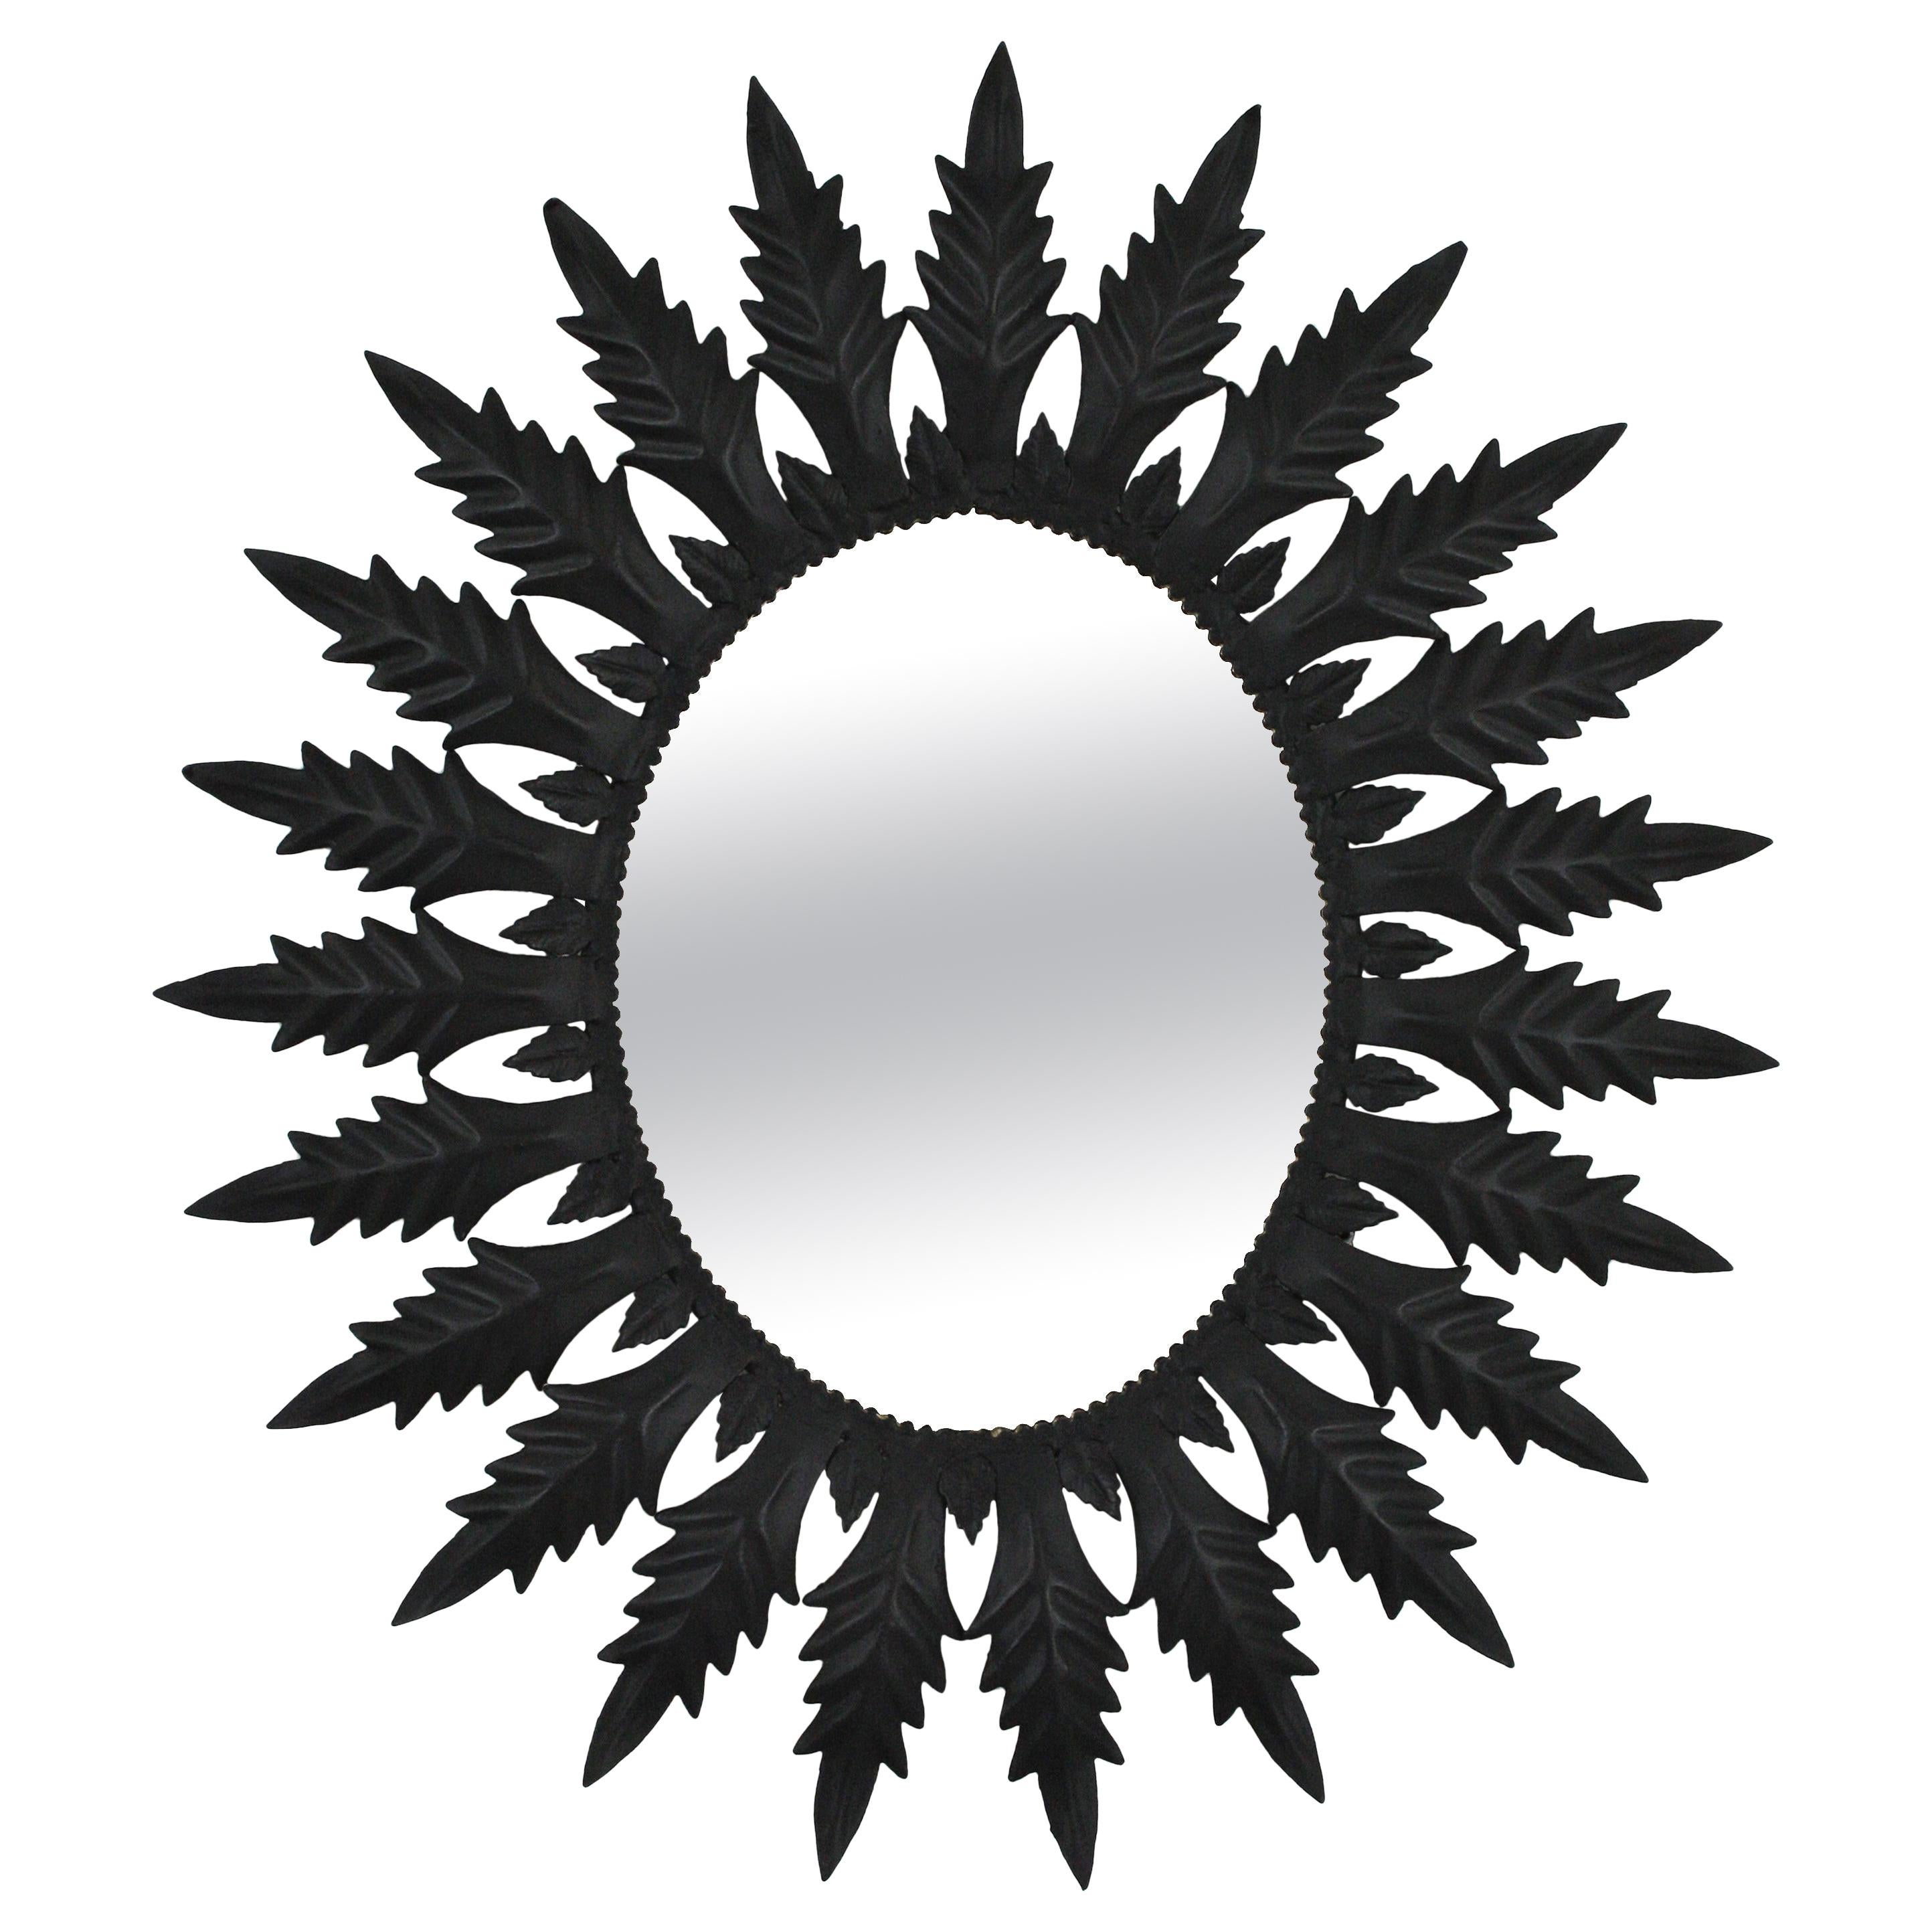 Spanish Sunburst Oval Mirror in Black Painted Iron, 1960s For Sale